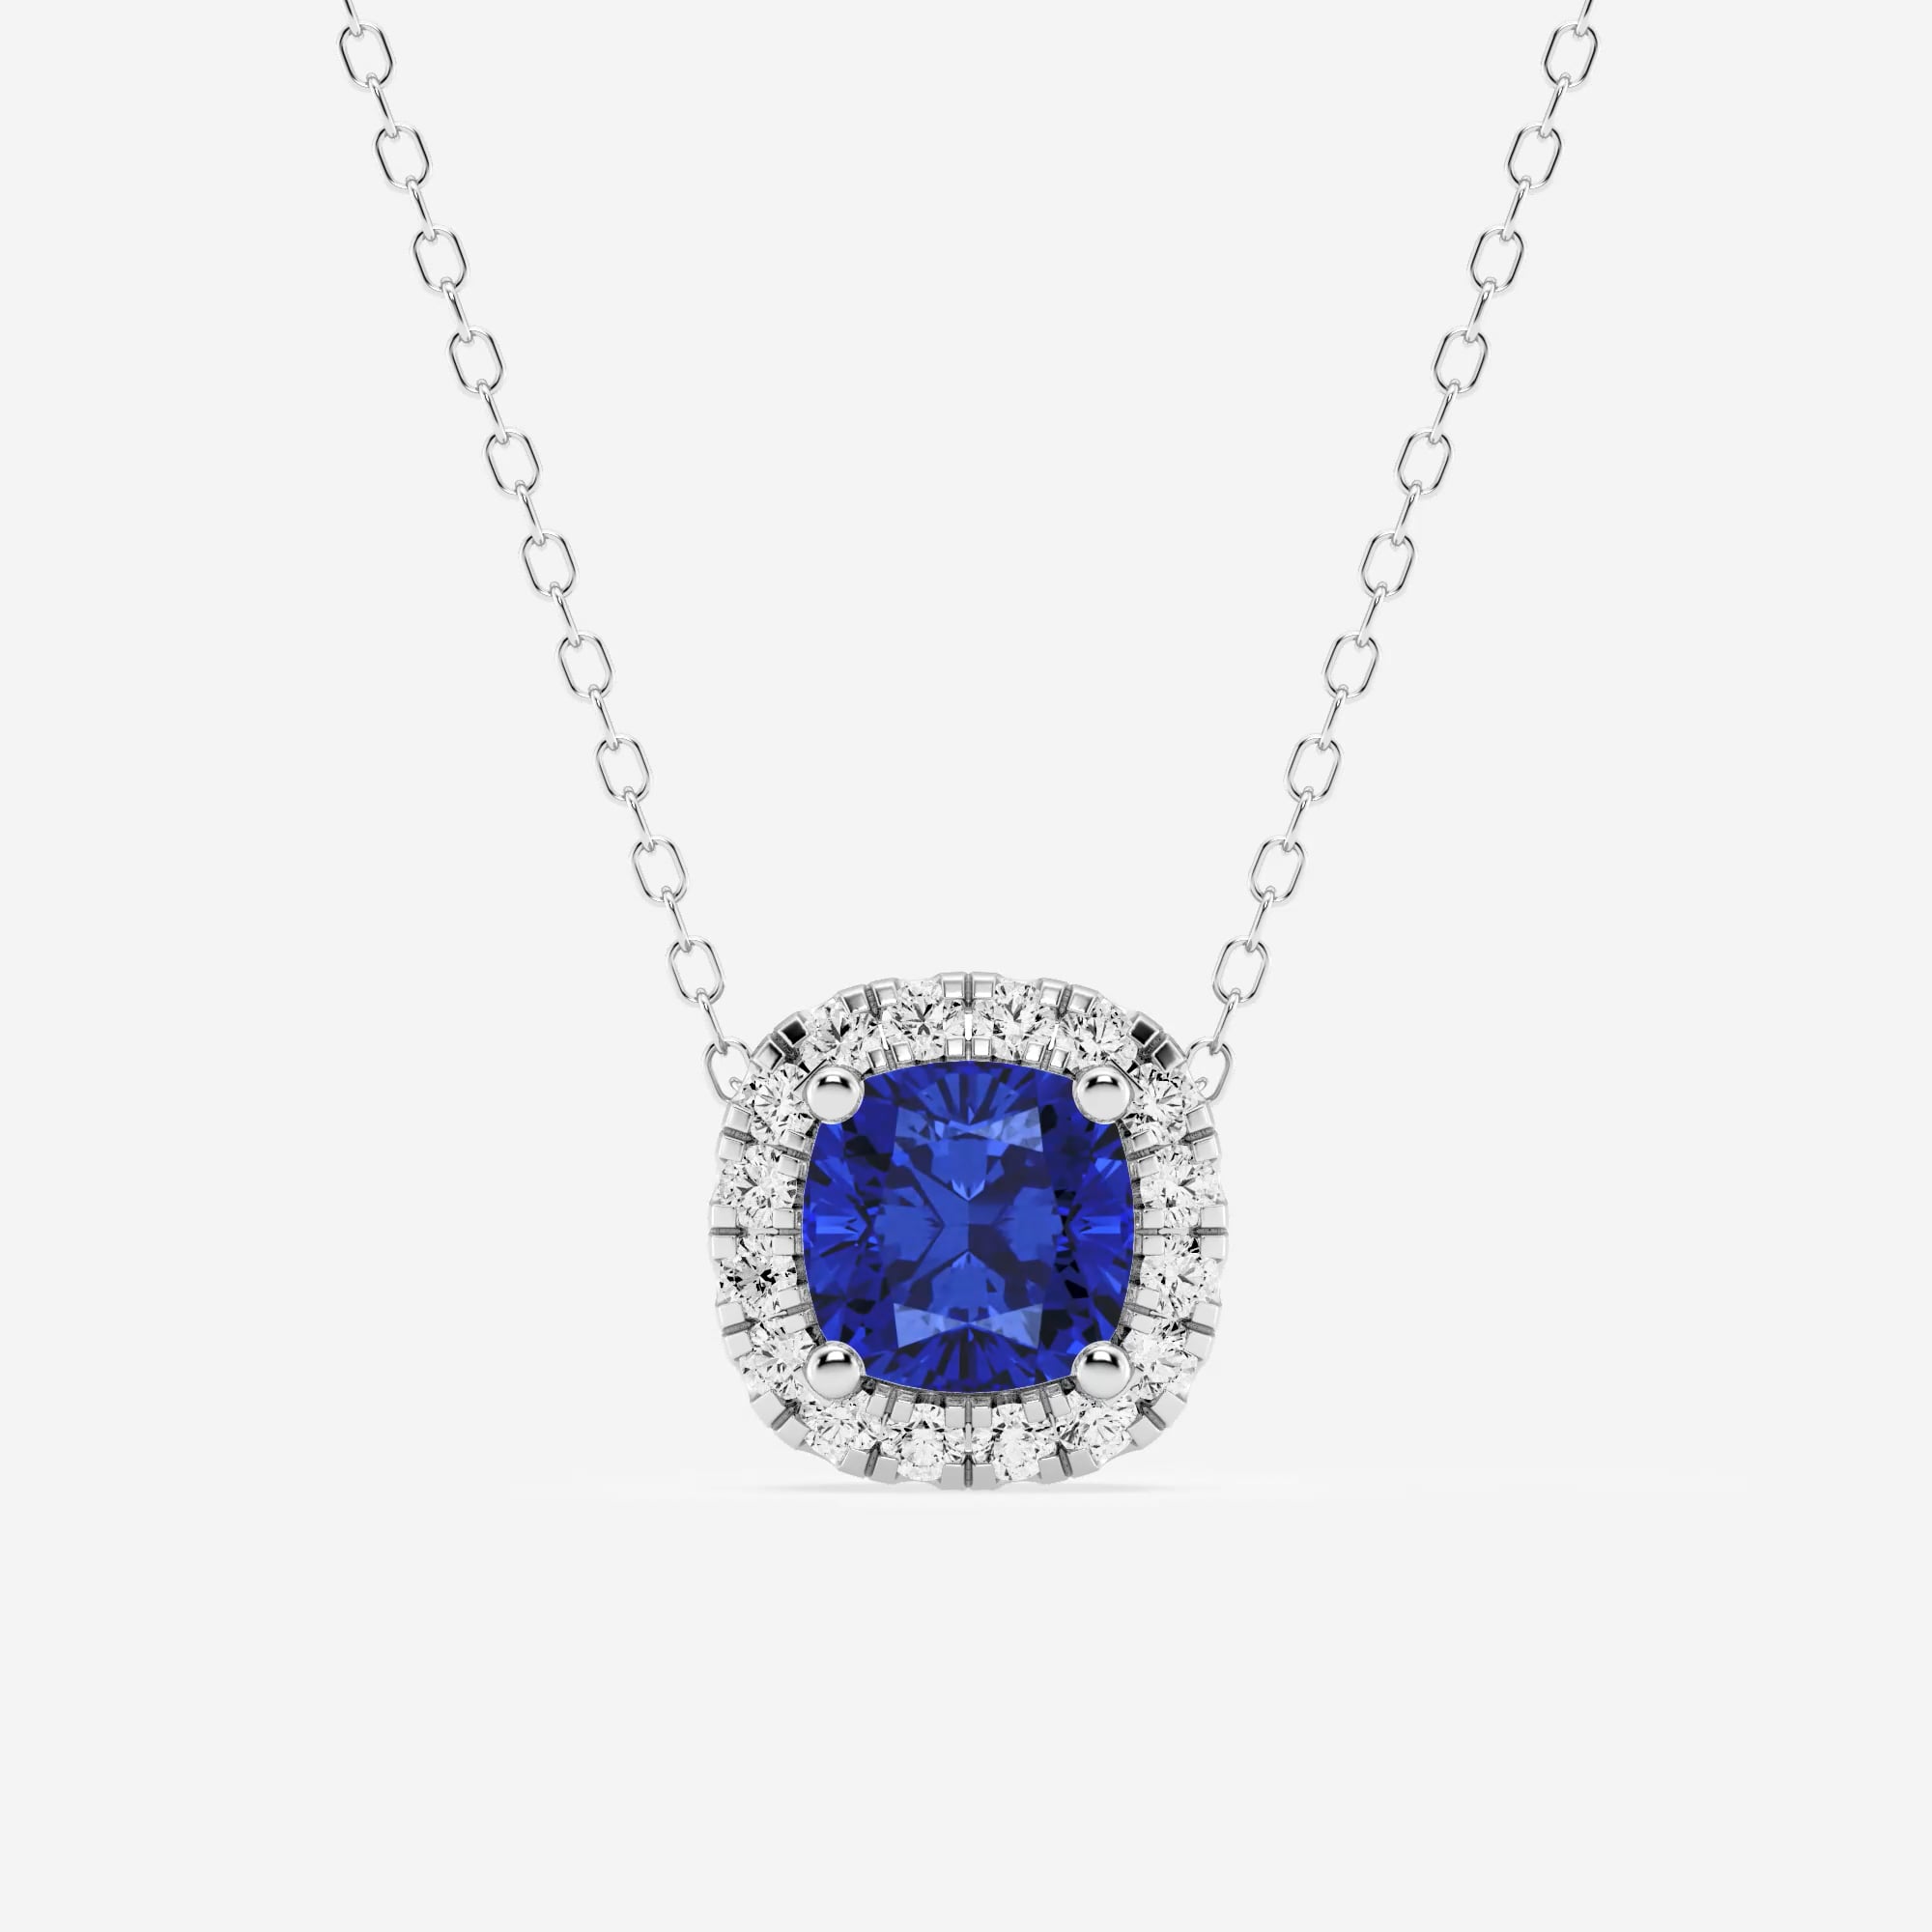 product video for 5.7x5.5 mm Cushion Cut Created Sapphire and 1/5 ctw Round Lab Grown Diamond Halo Pendant with Adjustable Chain